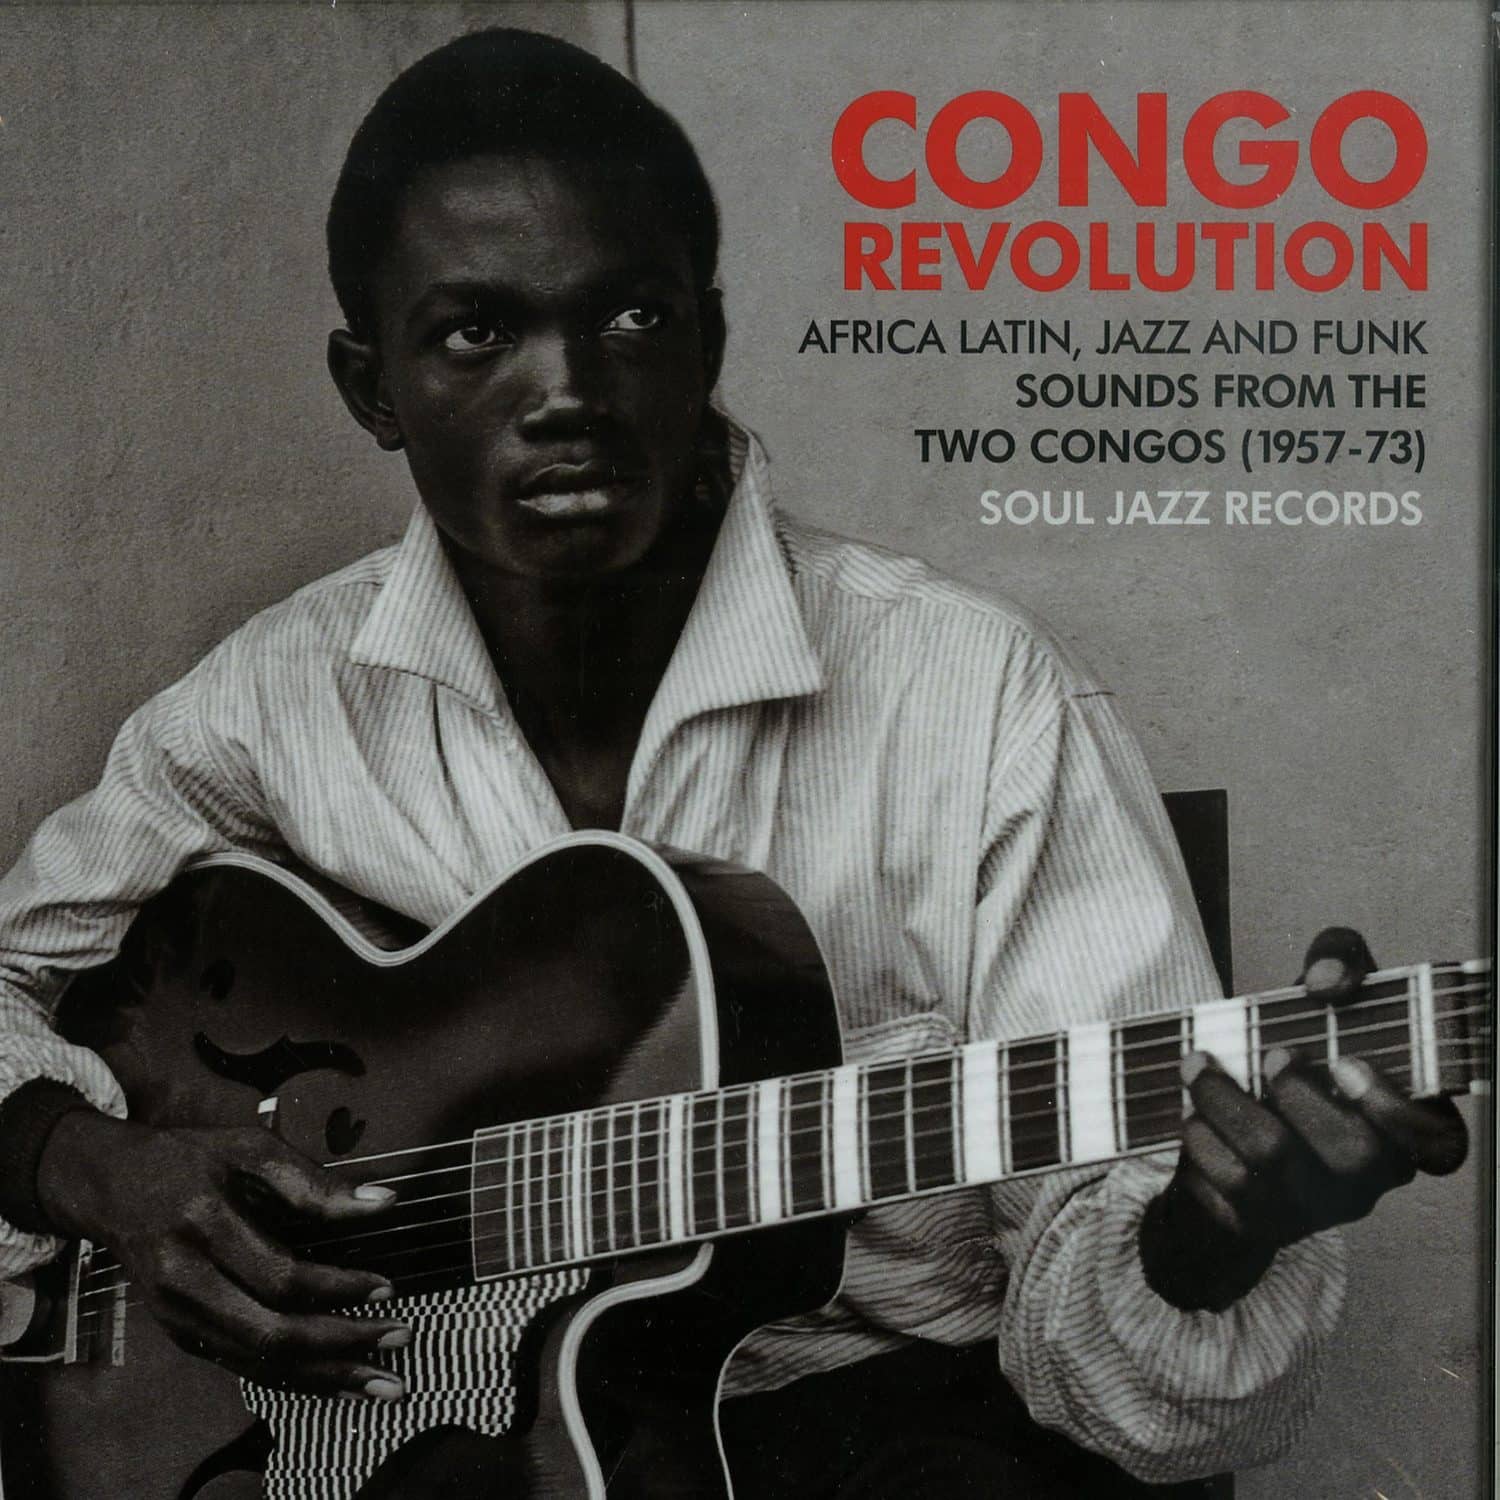 Congo Revolution - AFRO-LATIN, JAZZ AND FUNK EVOLUTIONARY AND REVOLUTIONARY SOUNDS FROM THE TWO CONGOS 